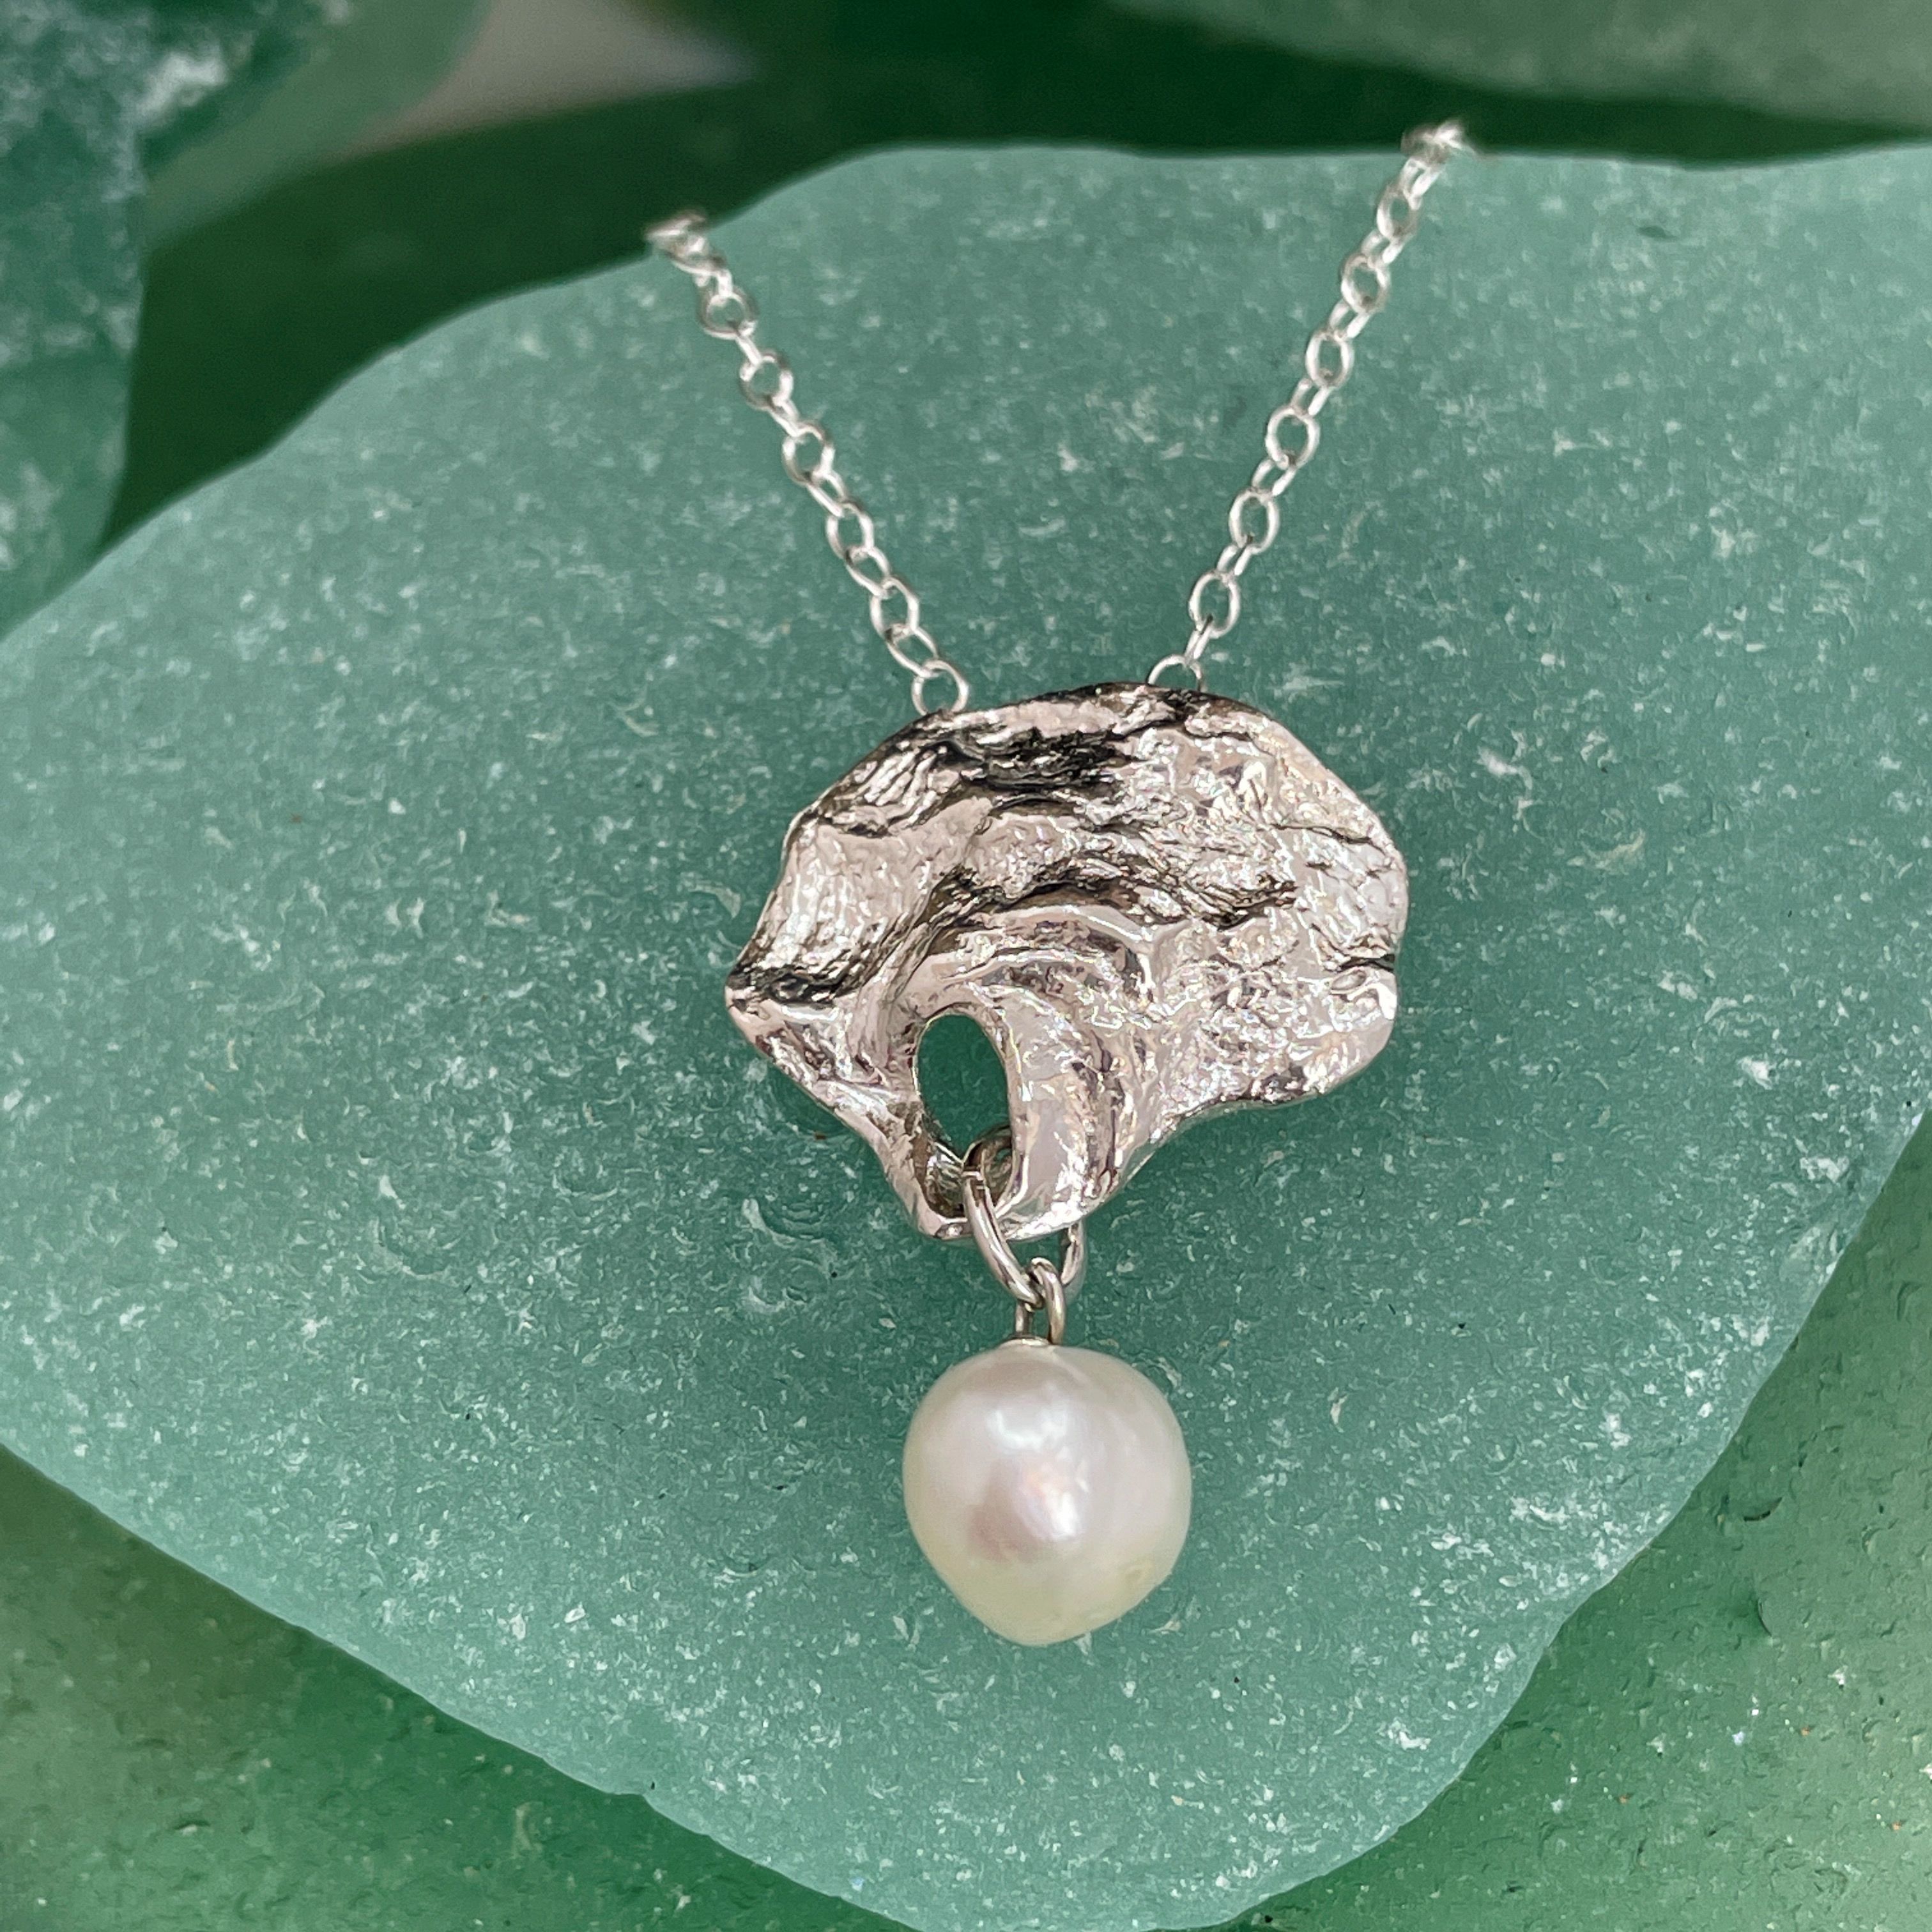 Silver oyster shell and pearl necklace